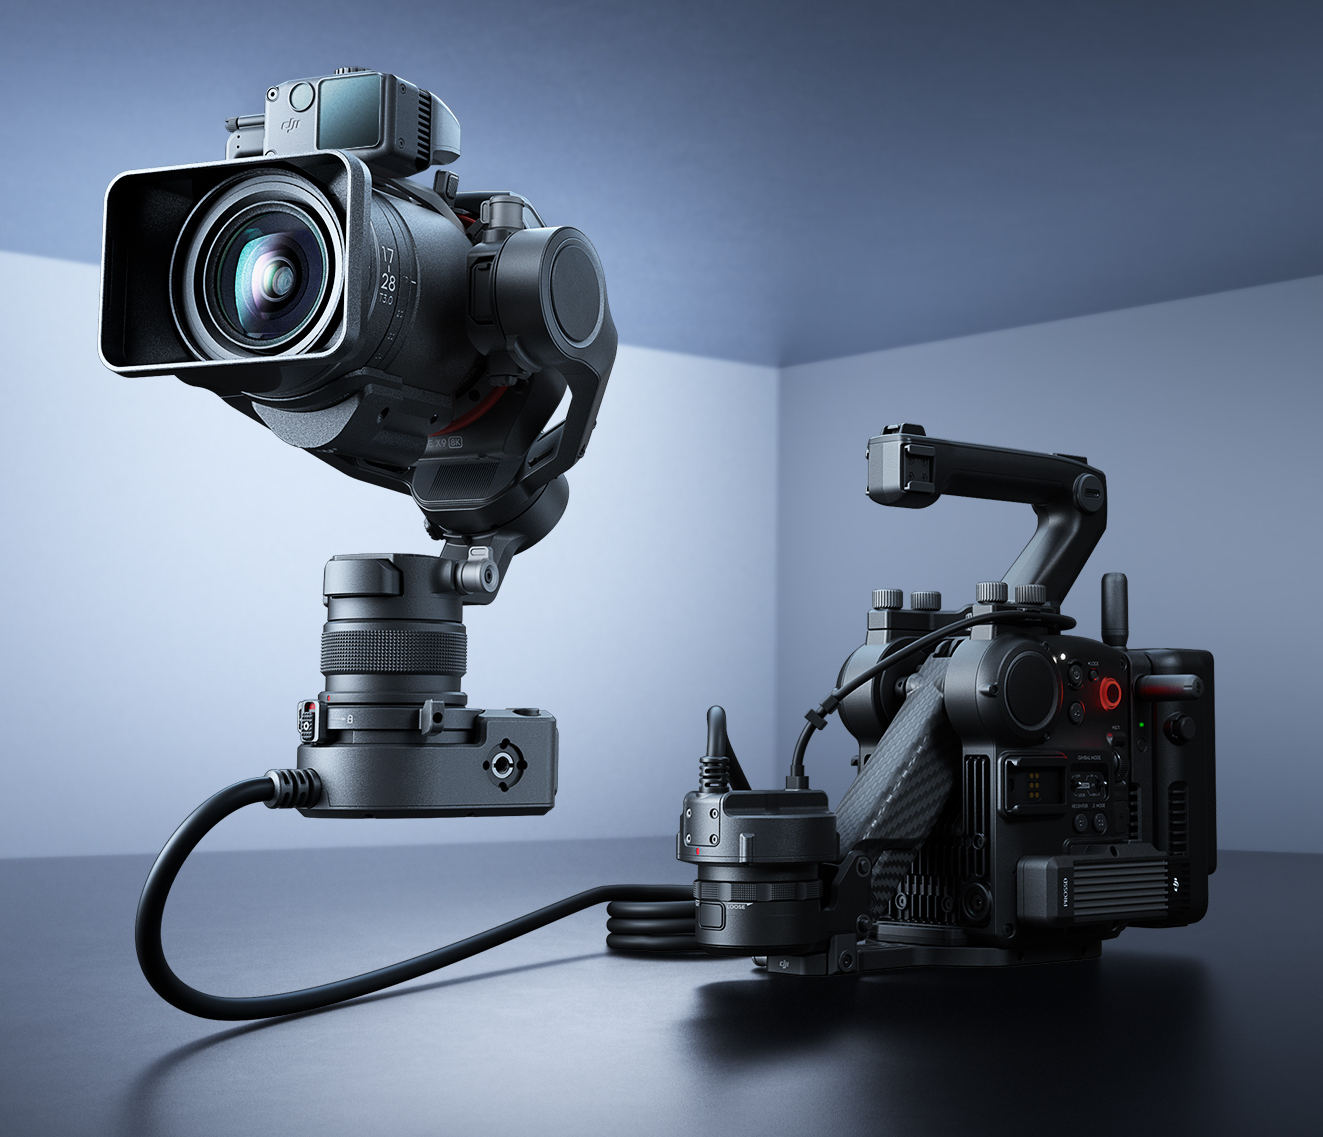 New Ronin 4D Flex turns Zenmuse X9 into a mini gimbal camera - and finally ProRes RAW